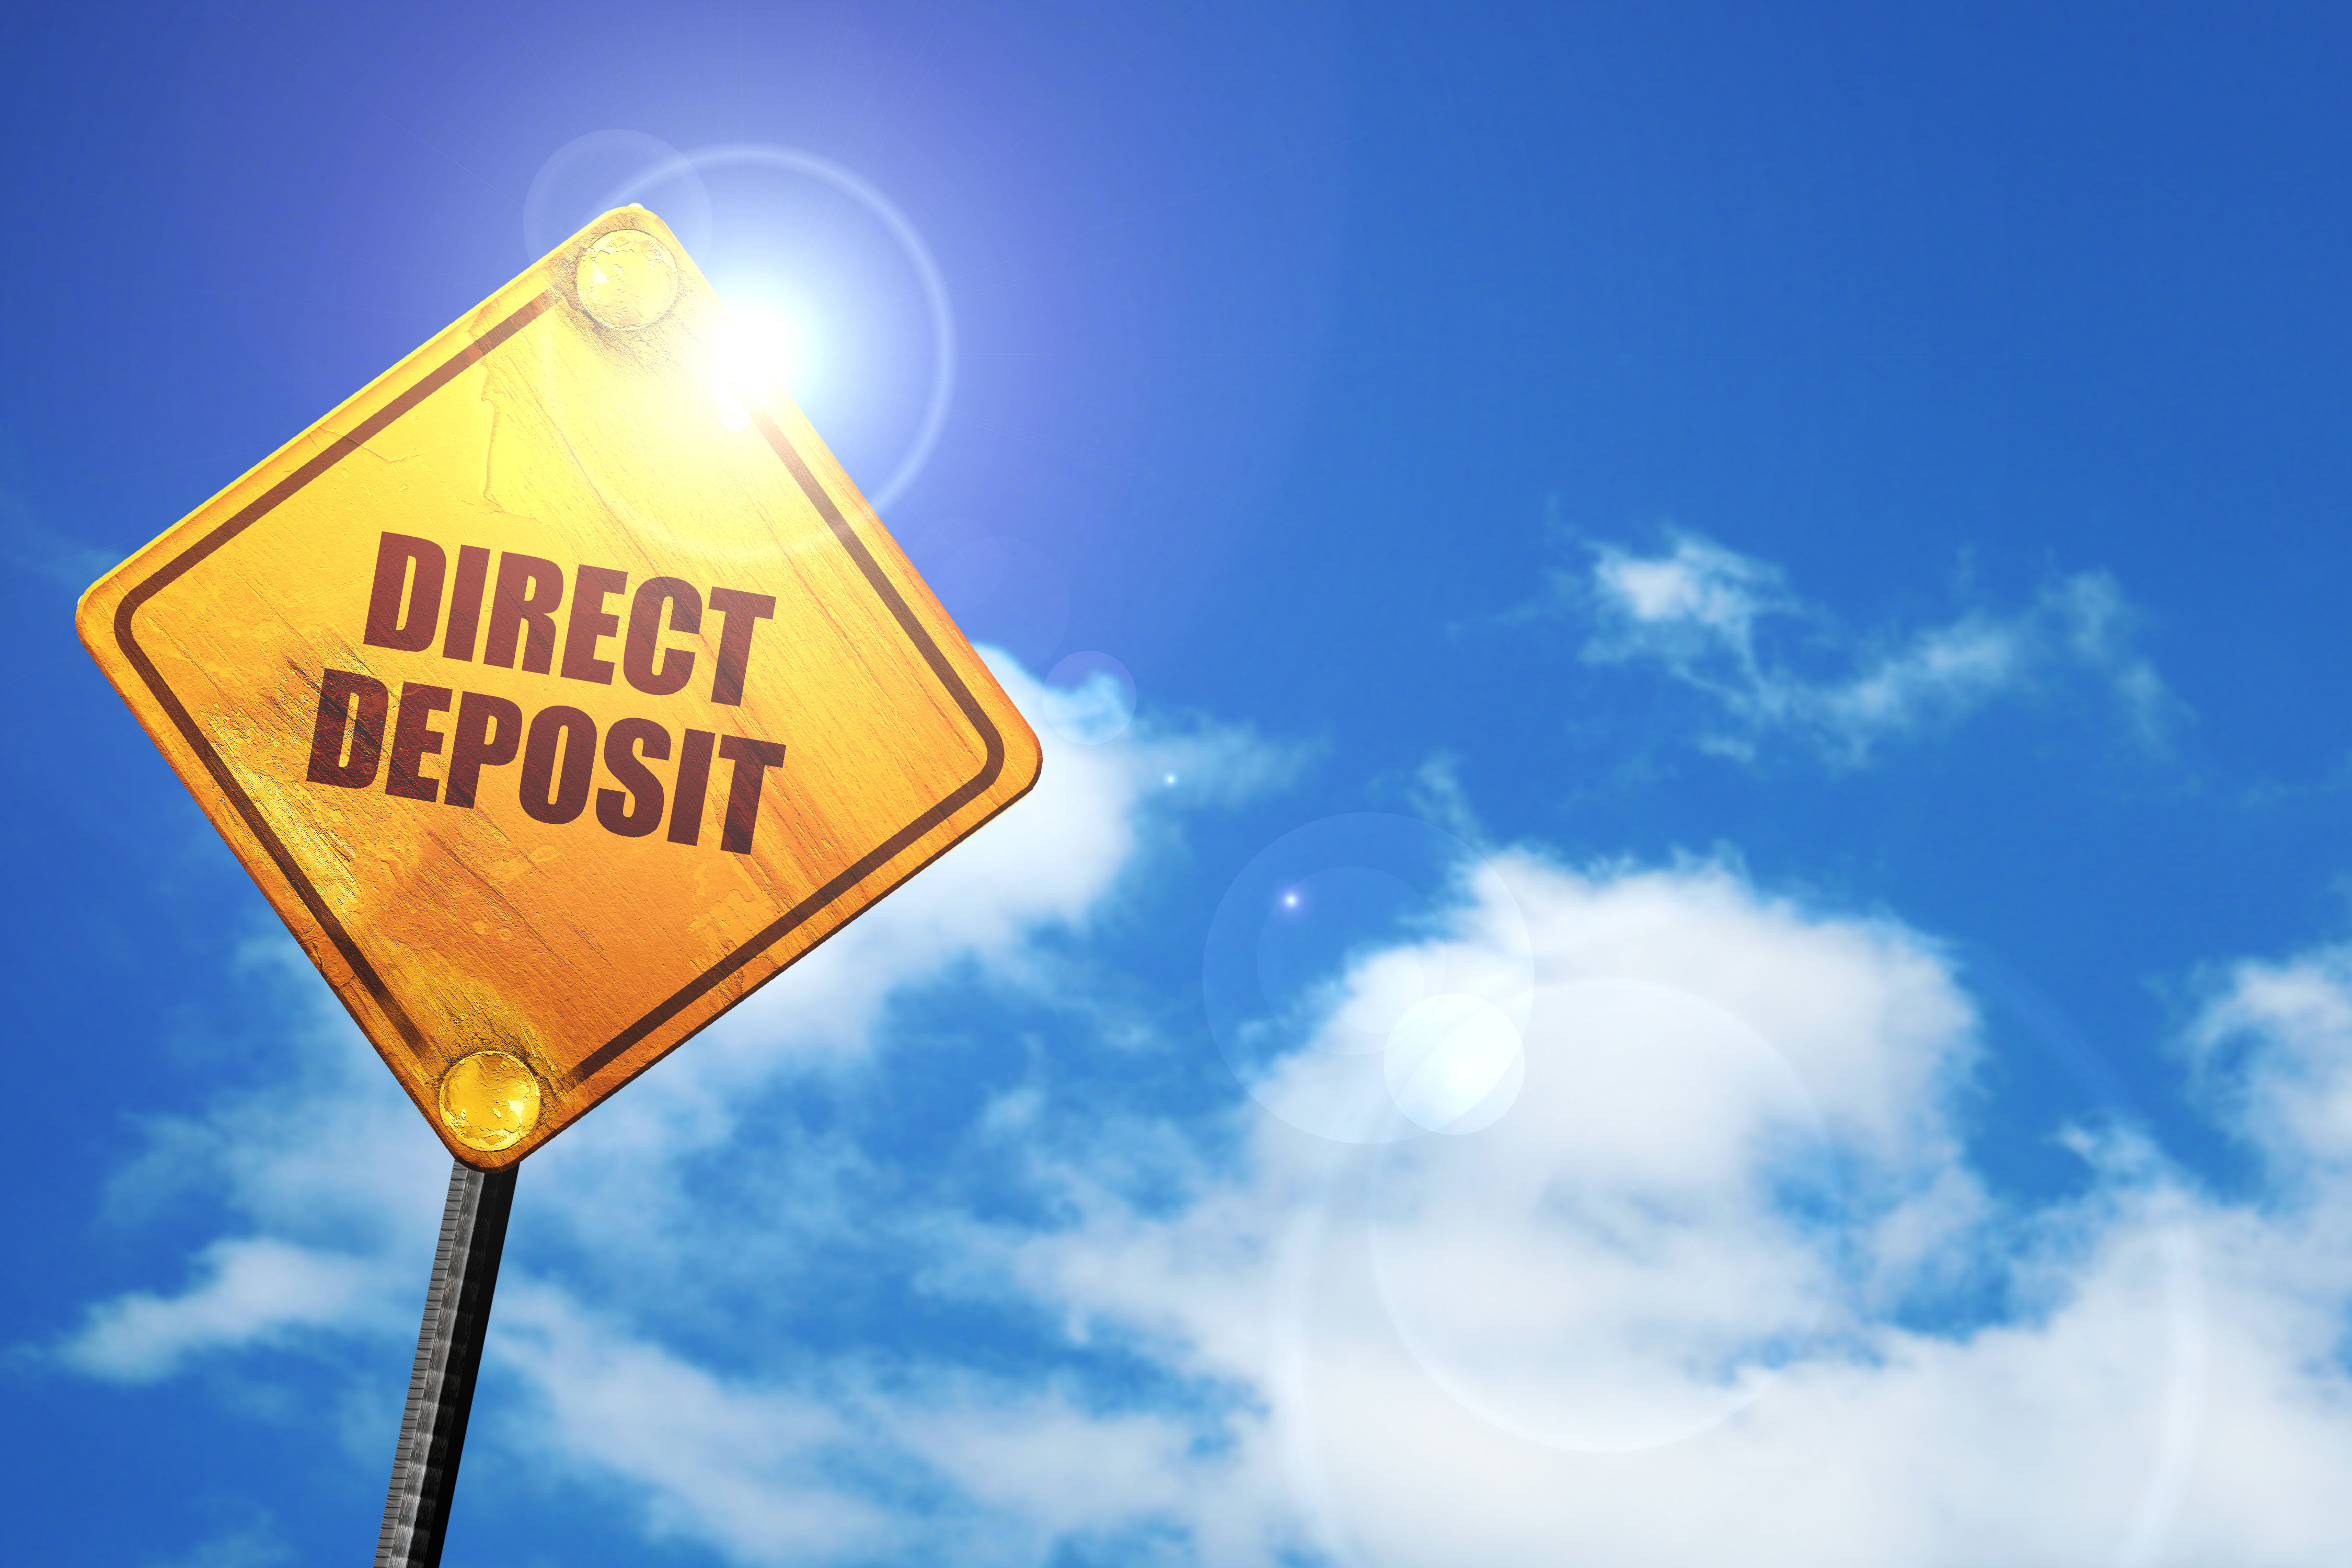 Why taxpayers should have their tax refund direct deposited